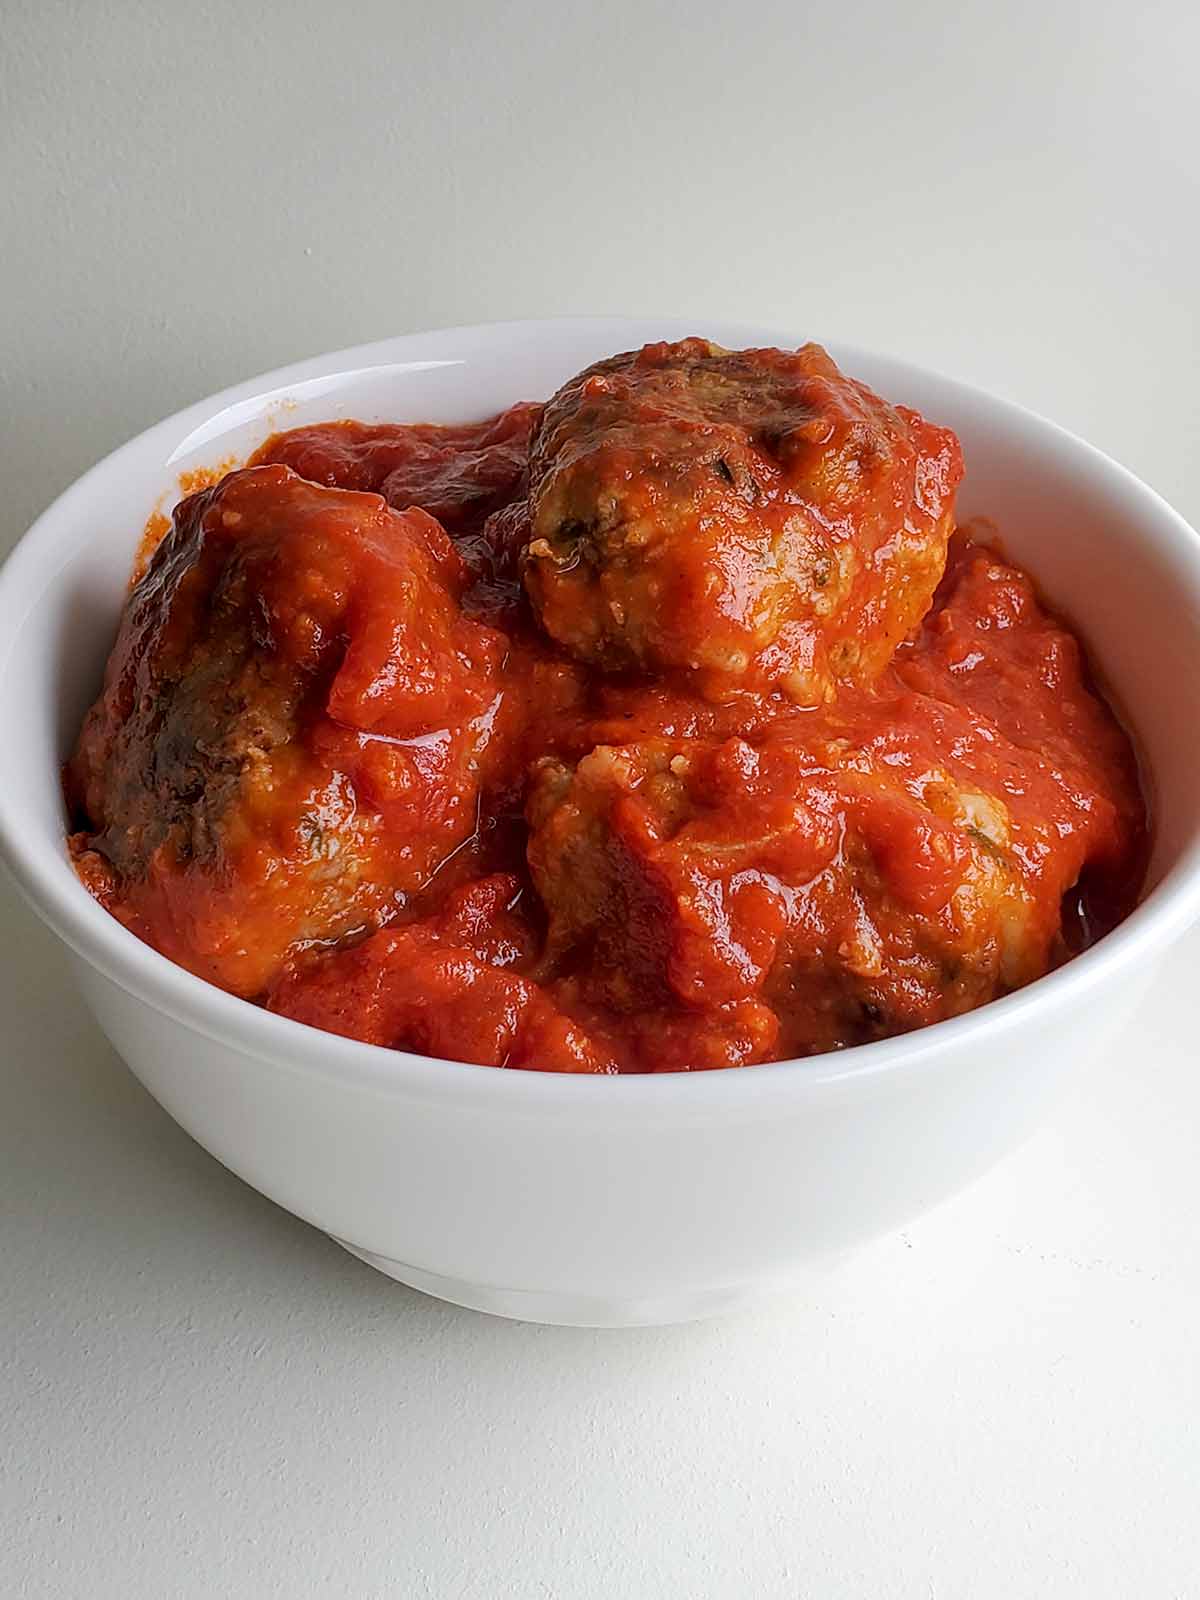 A white bowl filled with Italian-style meatballs and tomato sauce.